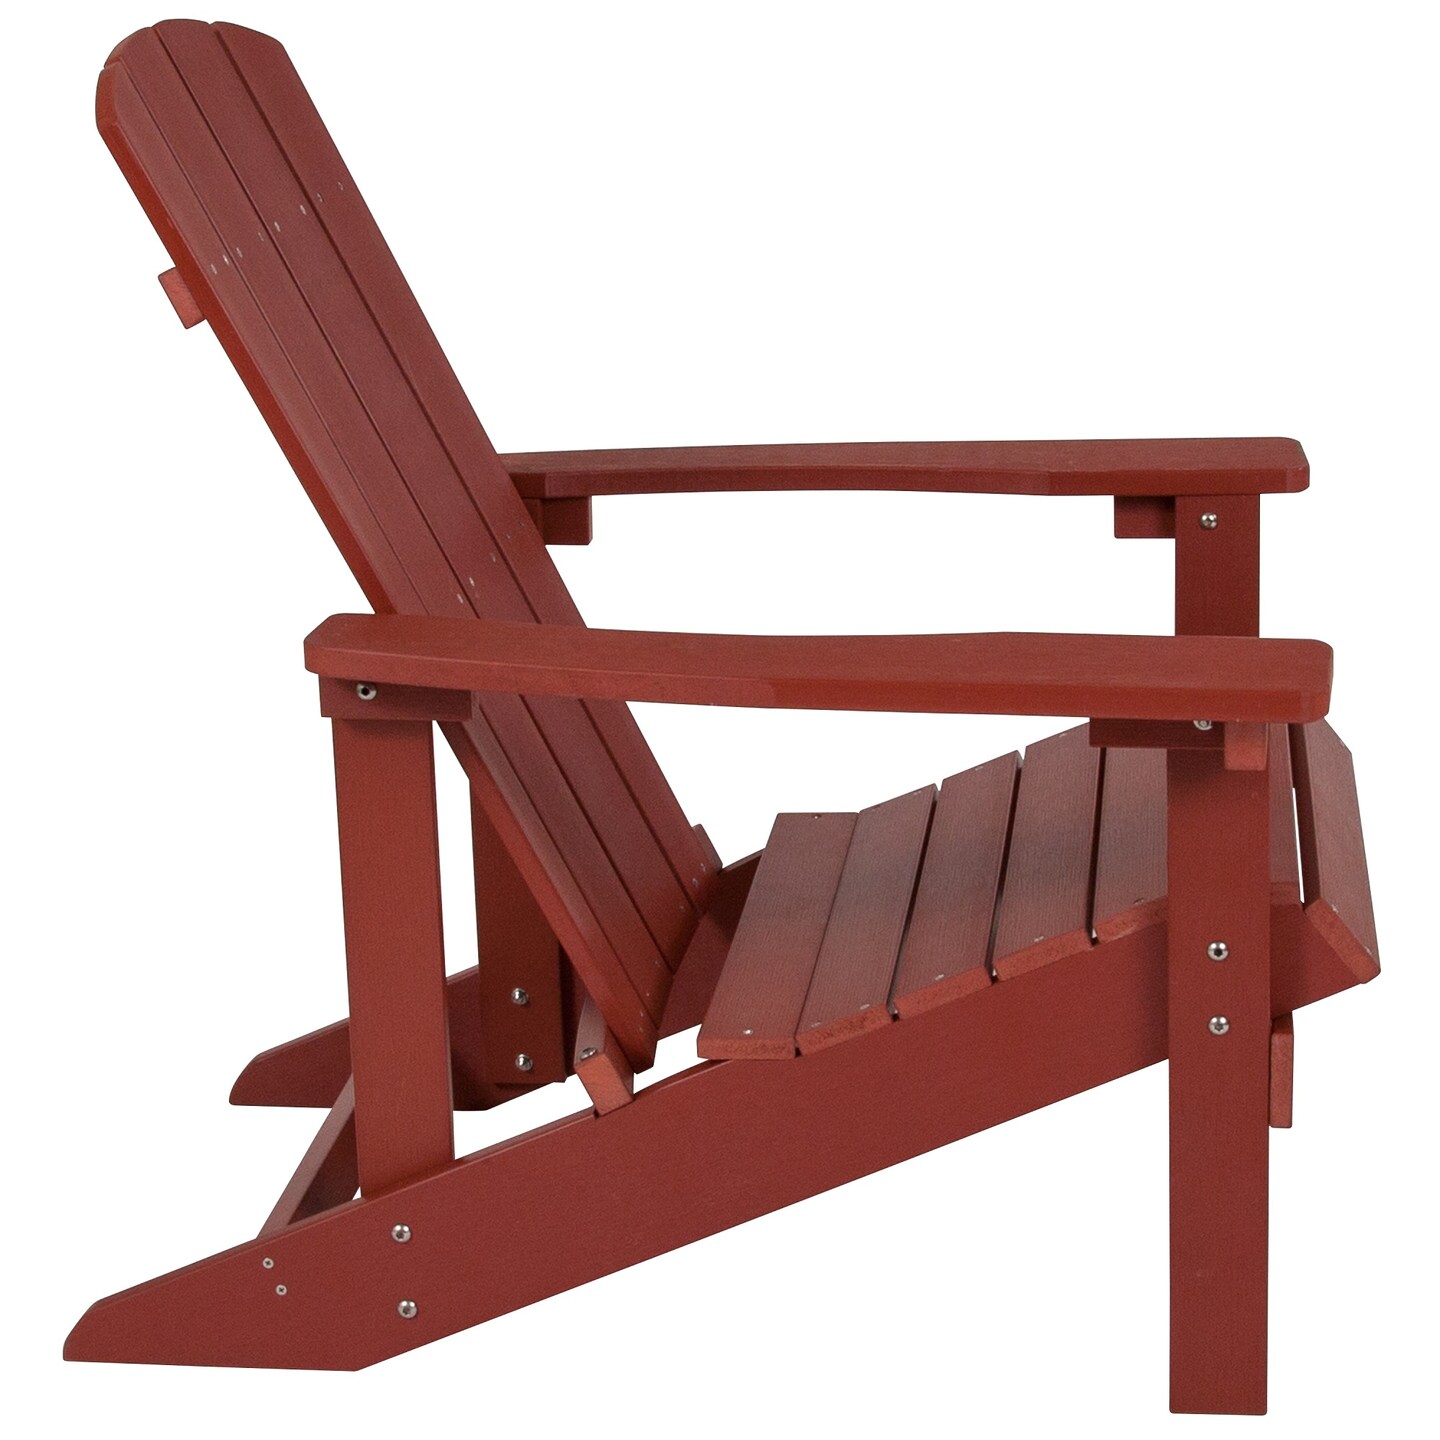 Furniture 35" Red Cottage Furniture Patio Adirondack Chair | Michaels